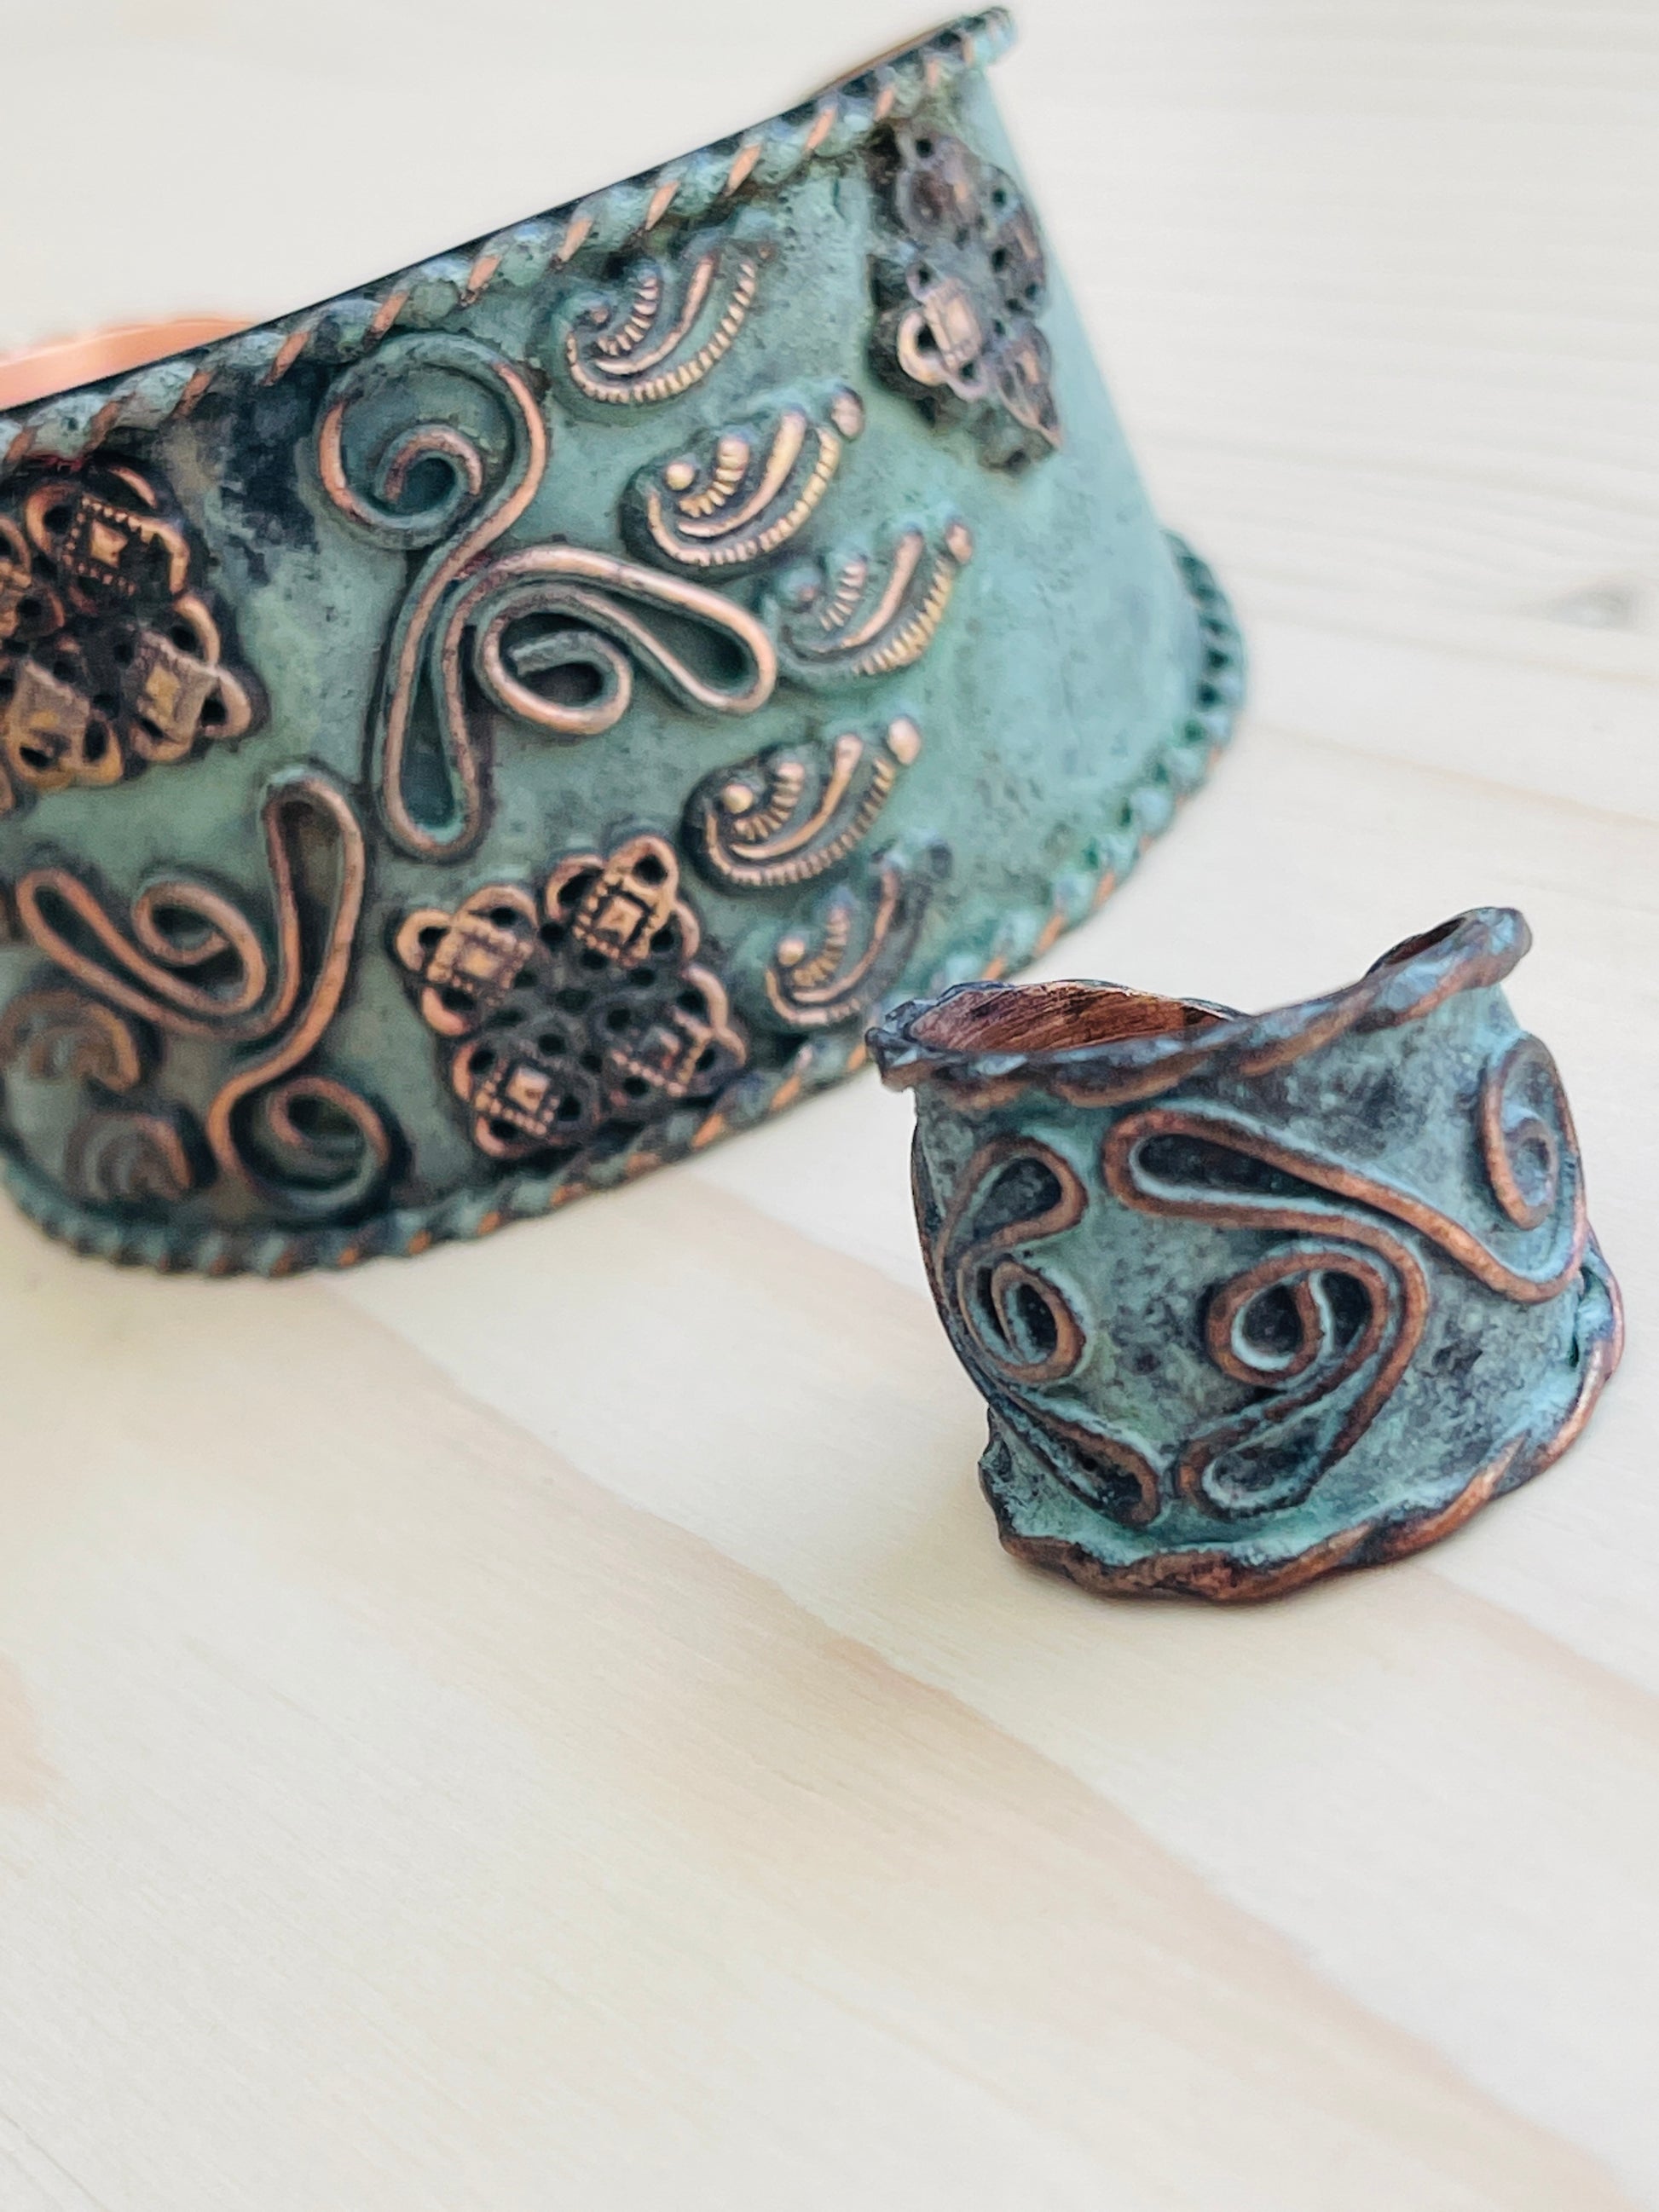 Handmade copper bracelet-cuff and ring designed with a beautiful pale aqua turquoise patina finish